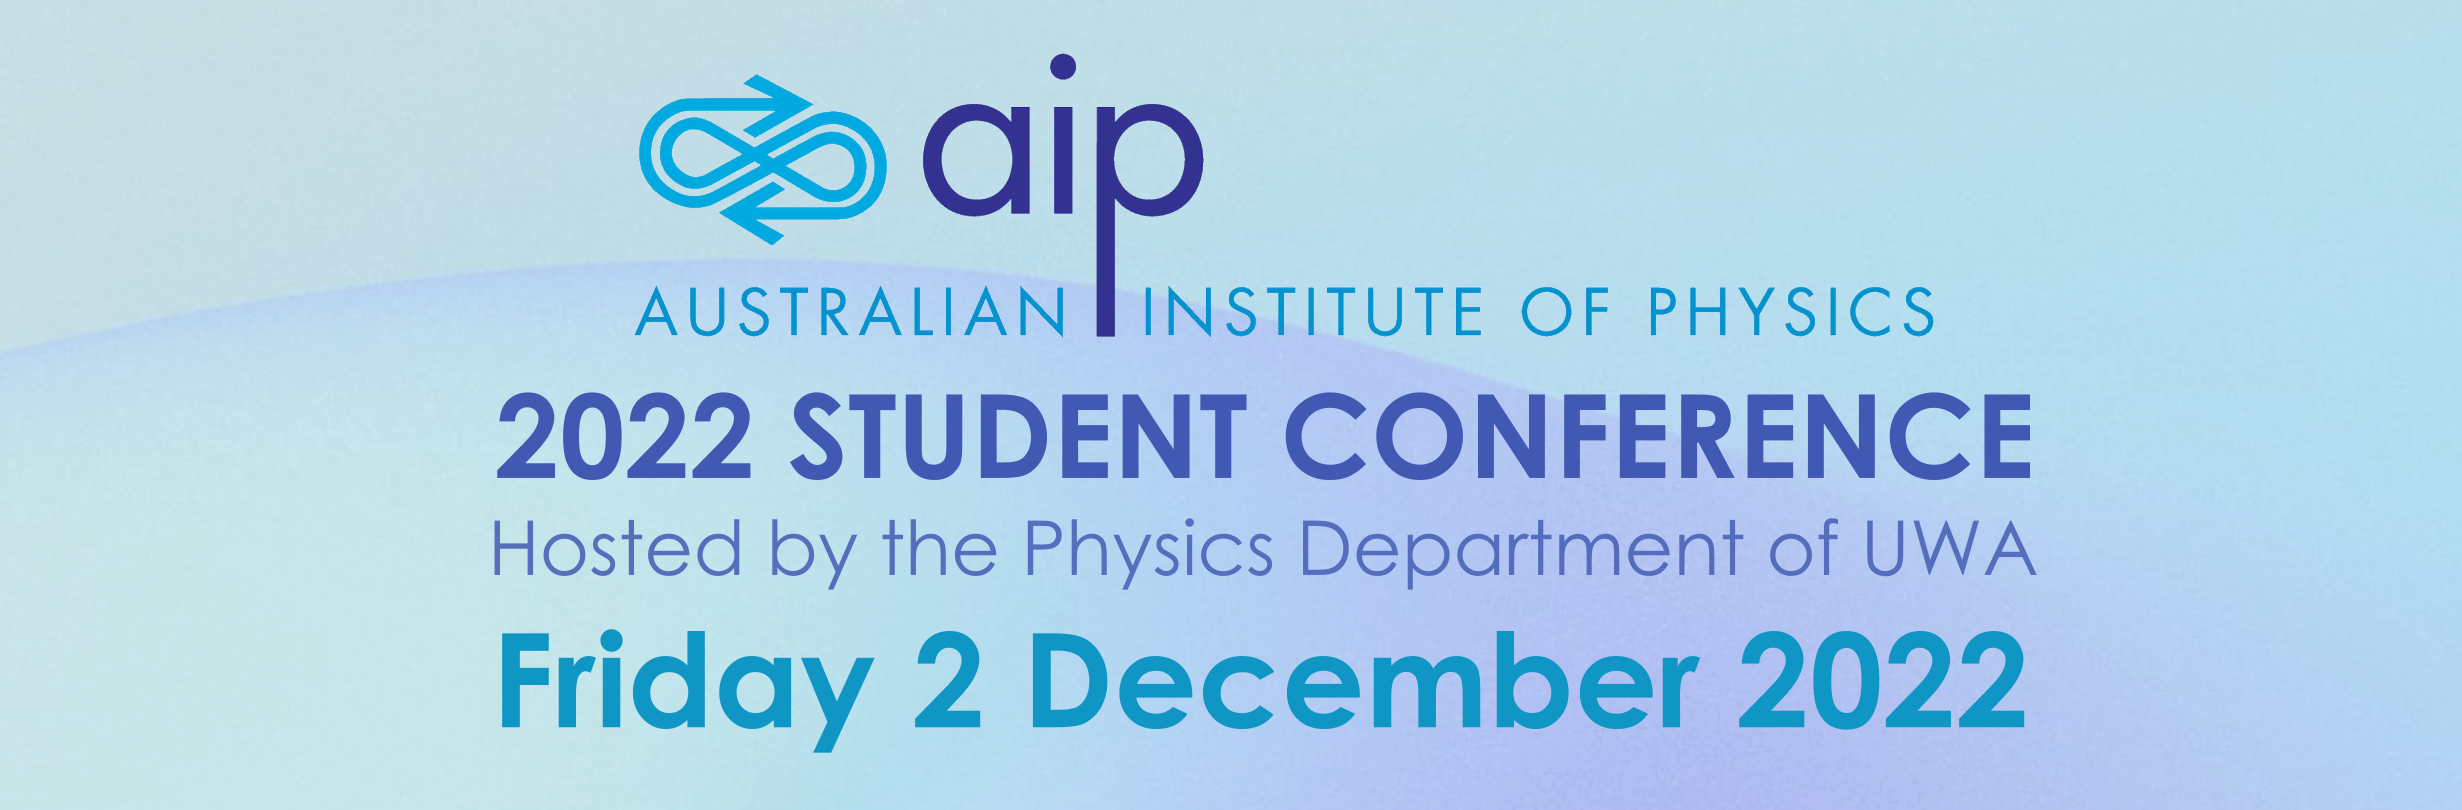 AIP Student Conference 2022 WA